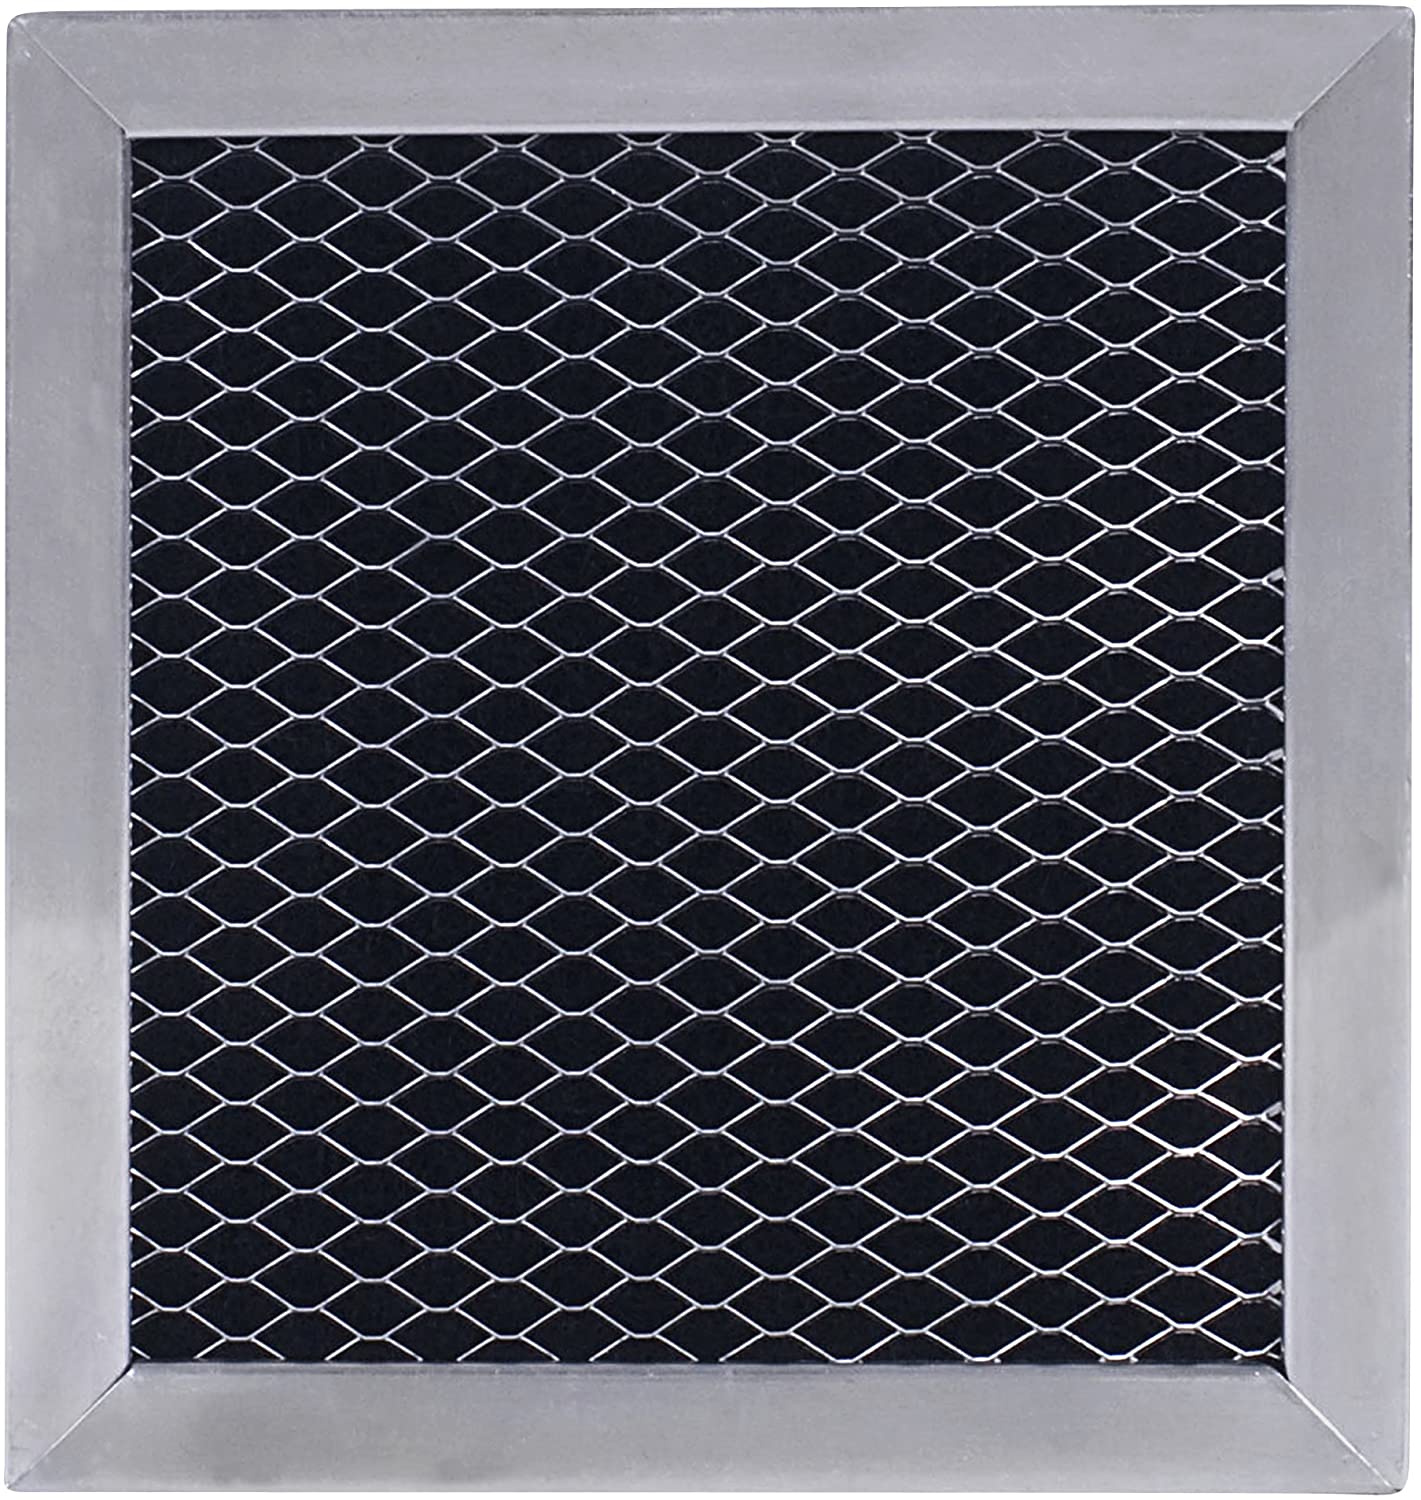 Whirlpool Microwave Range Hood Charcoal Odour Filter. Part #8206230A